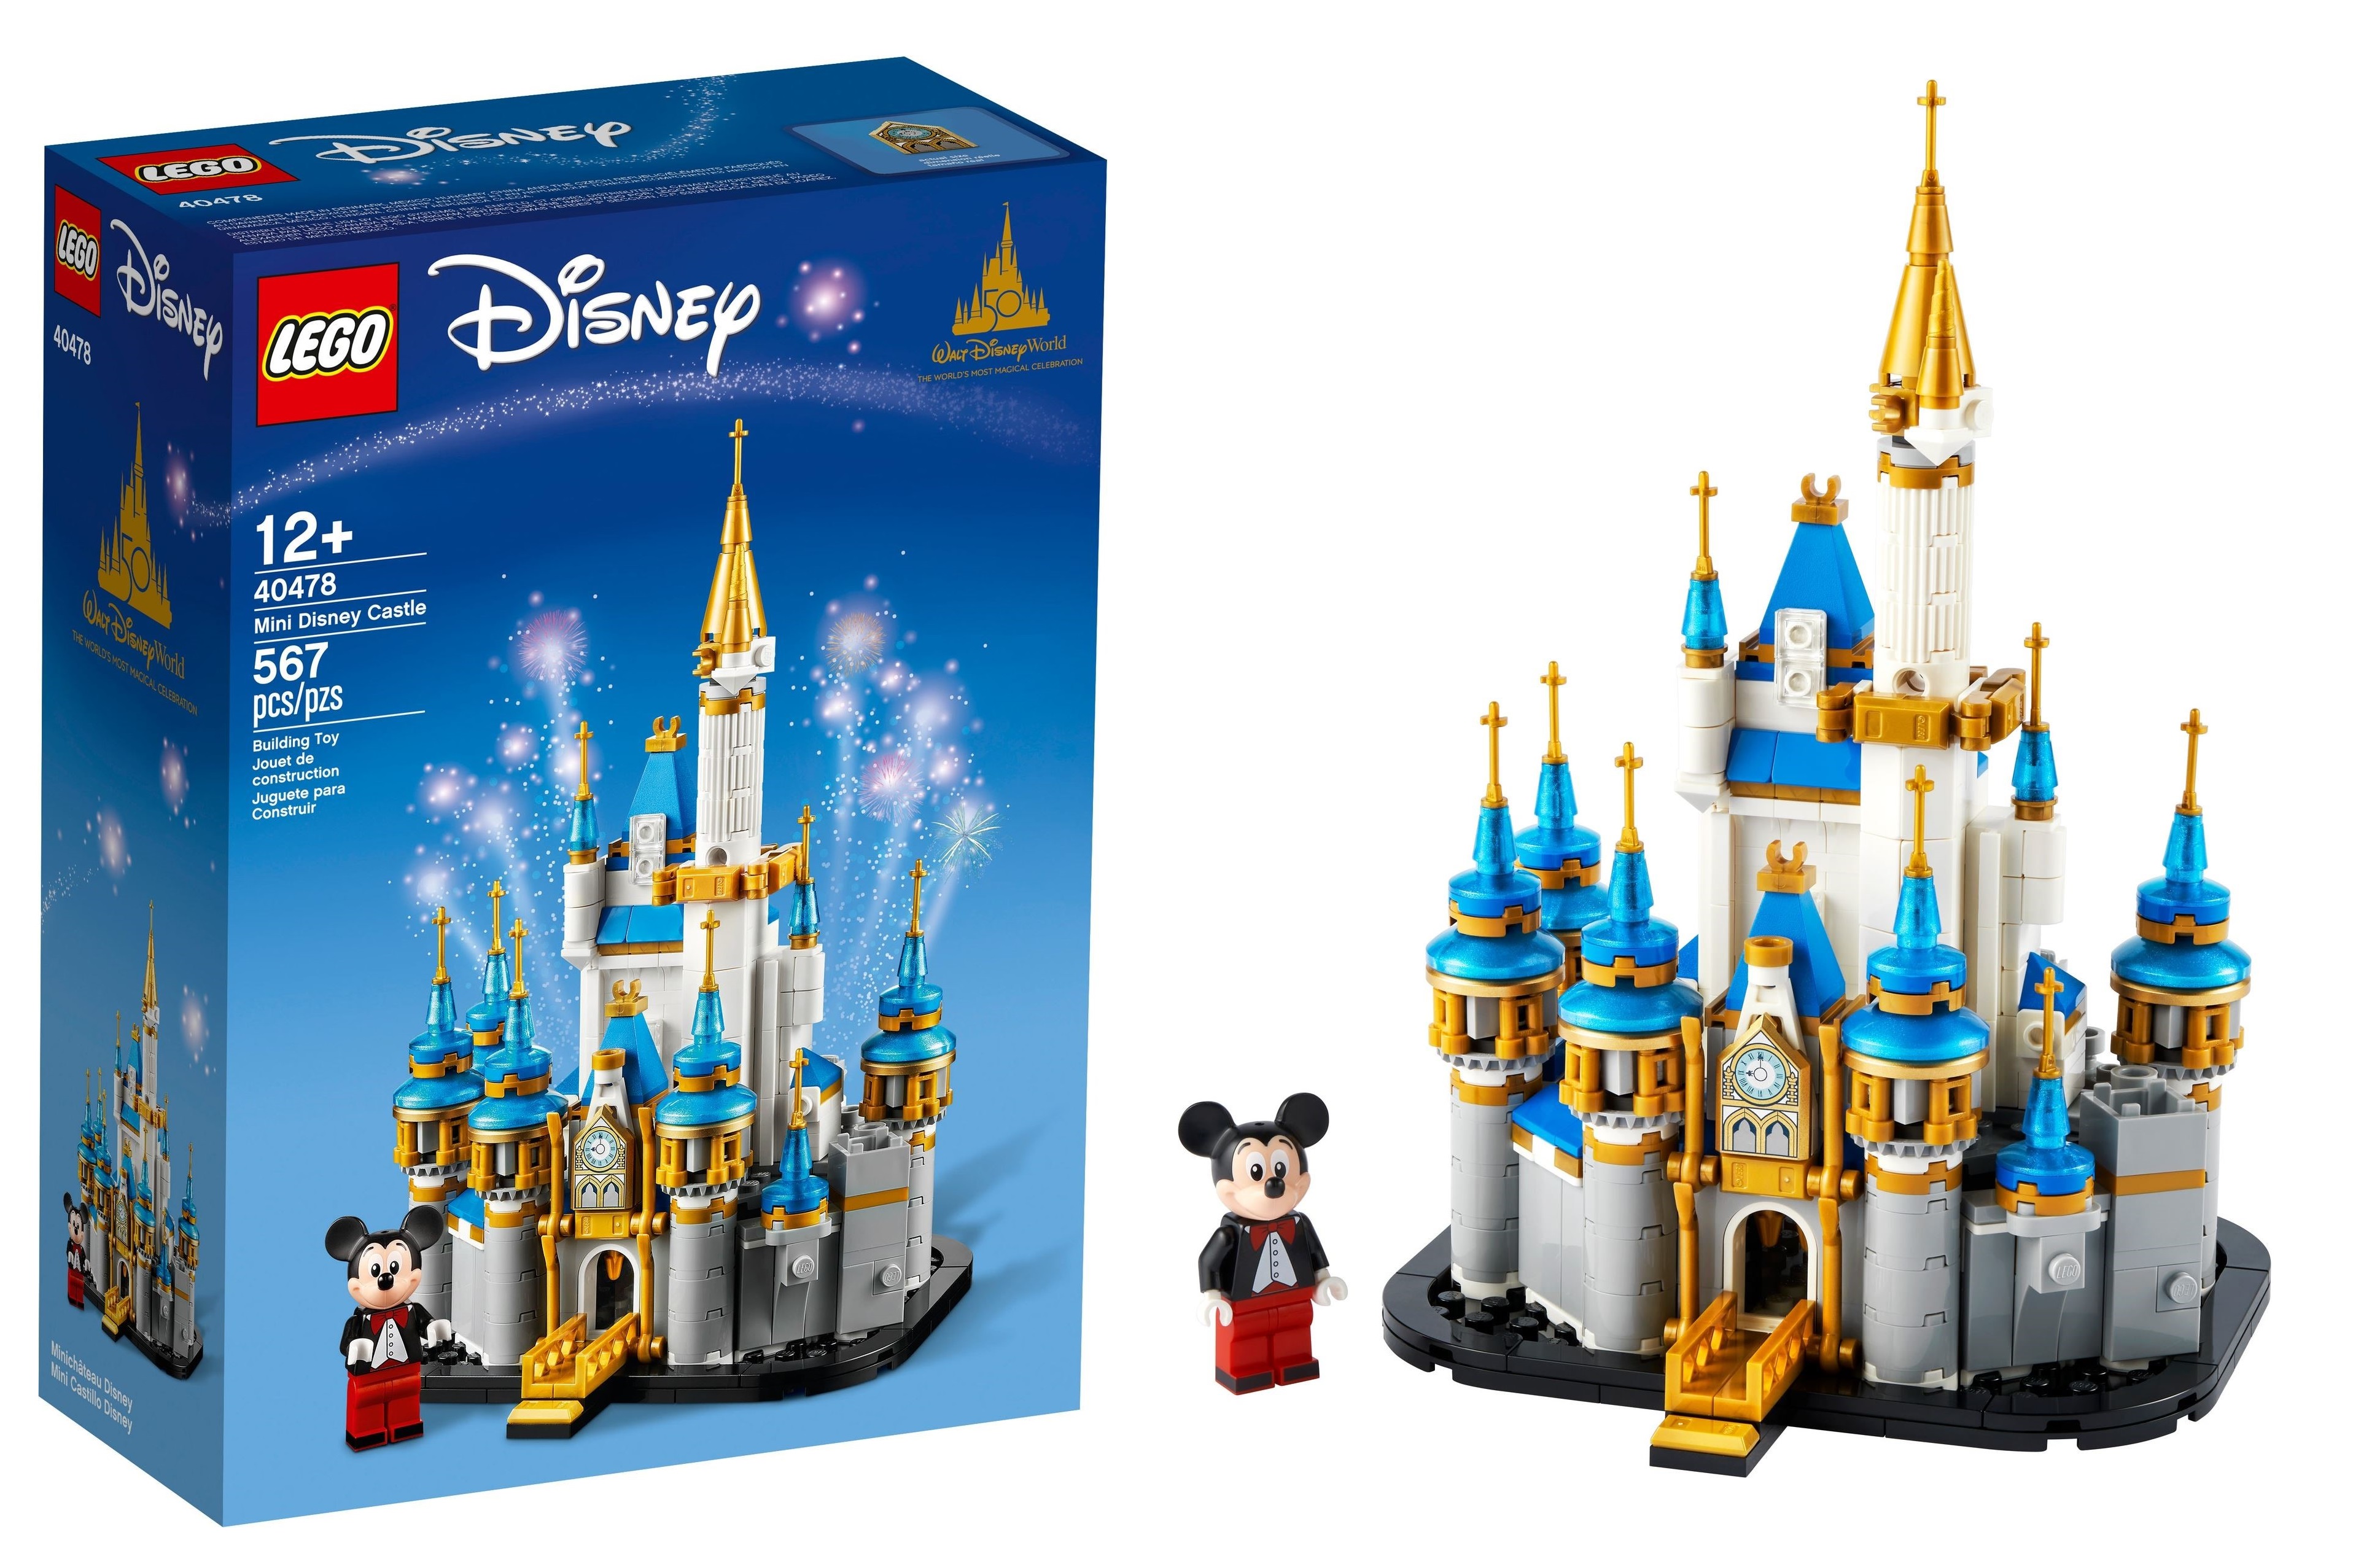 The mini LEGO Disney Castle (40478) now has a price, release date and